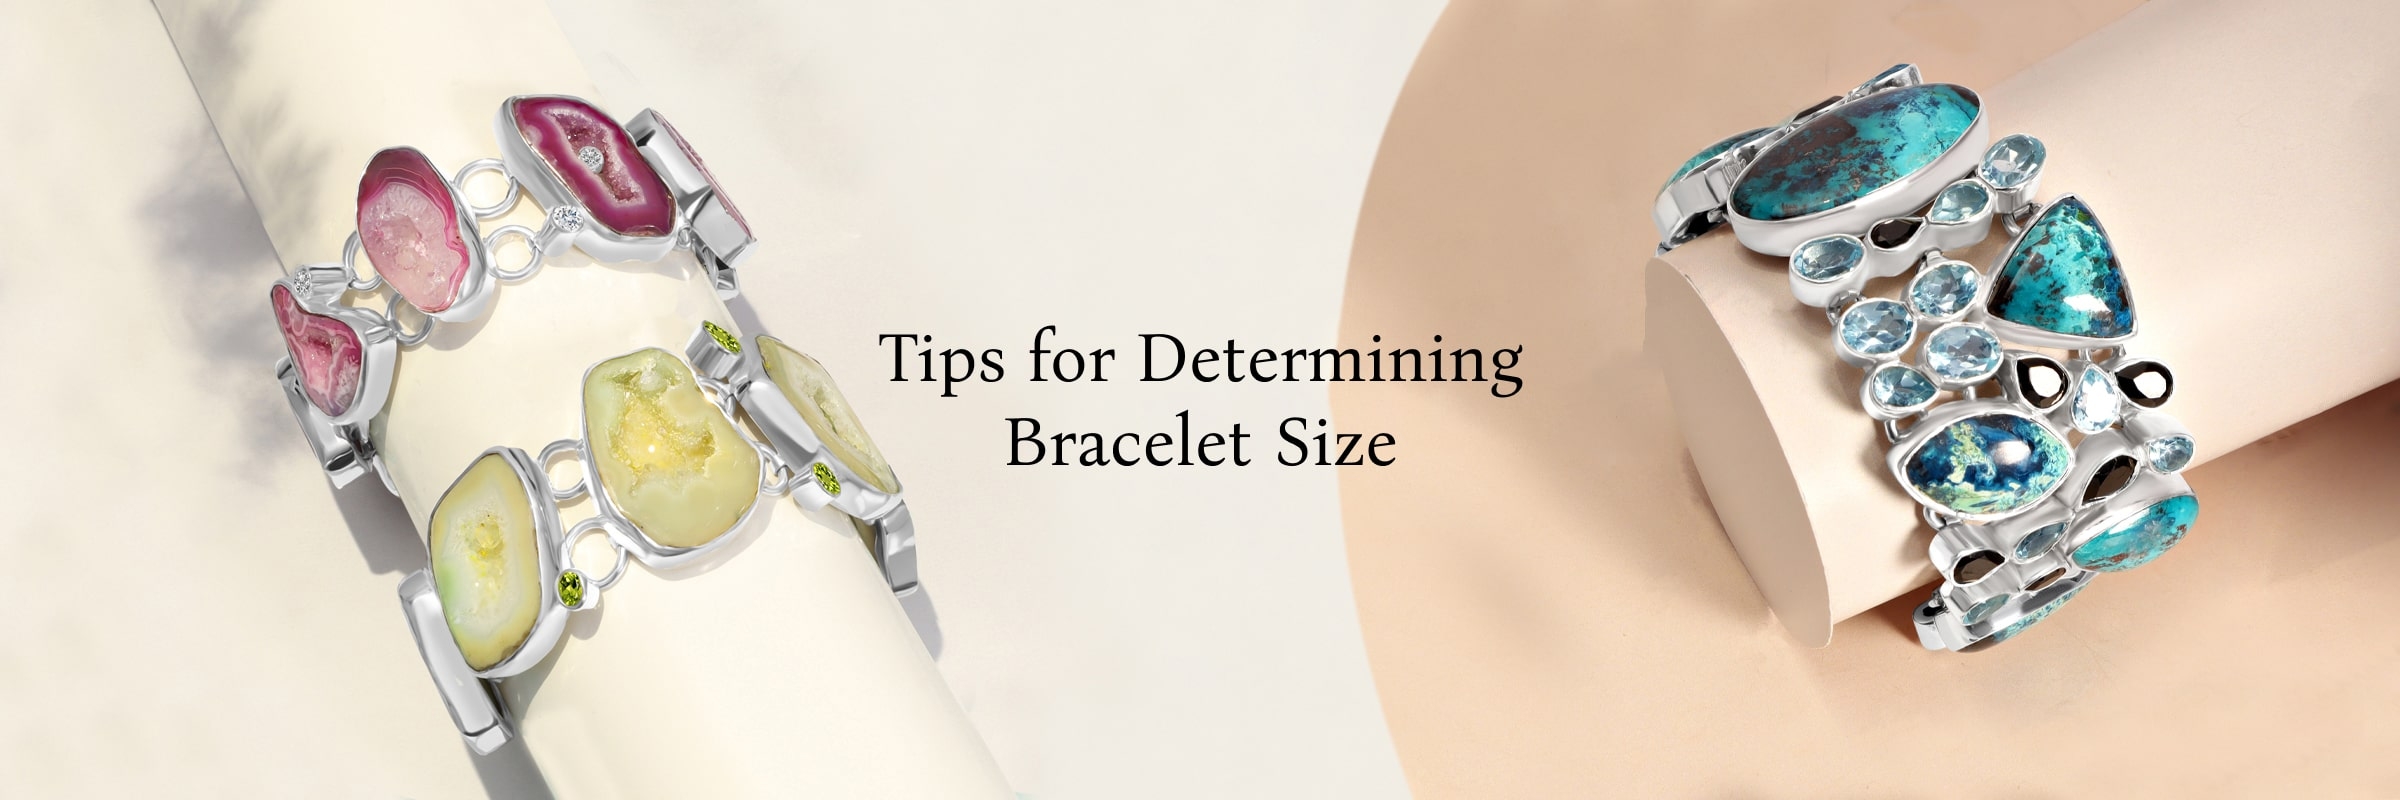 How Can You Determine Your Bracelet Size?